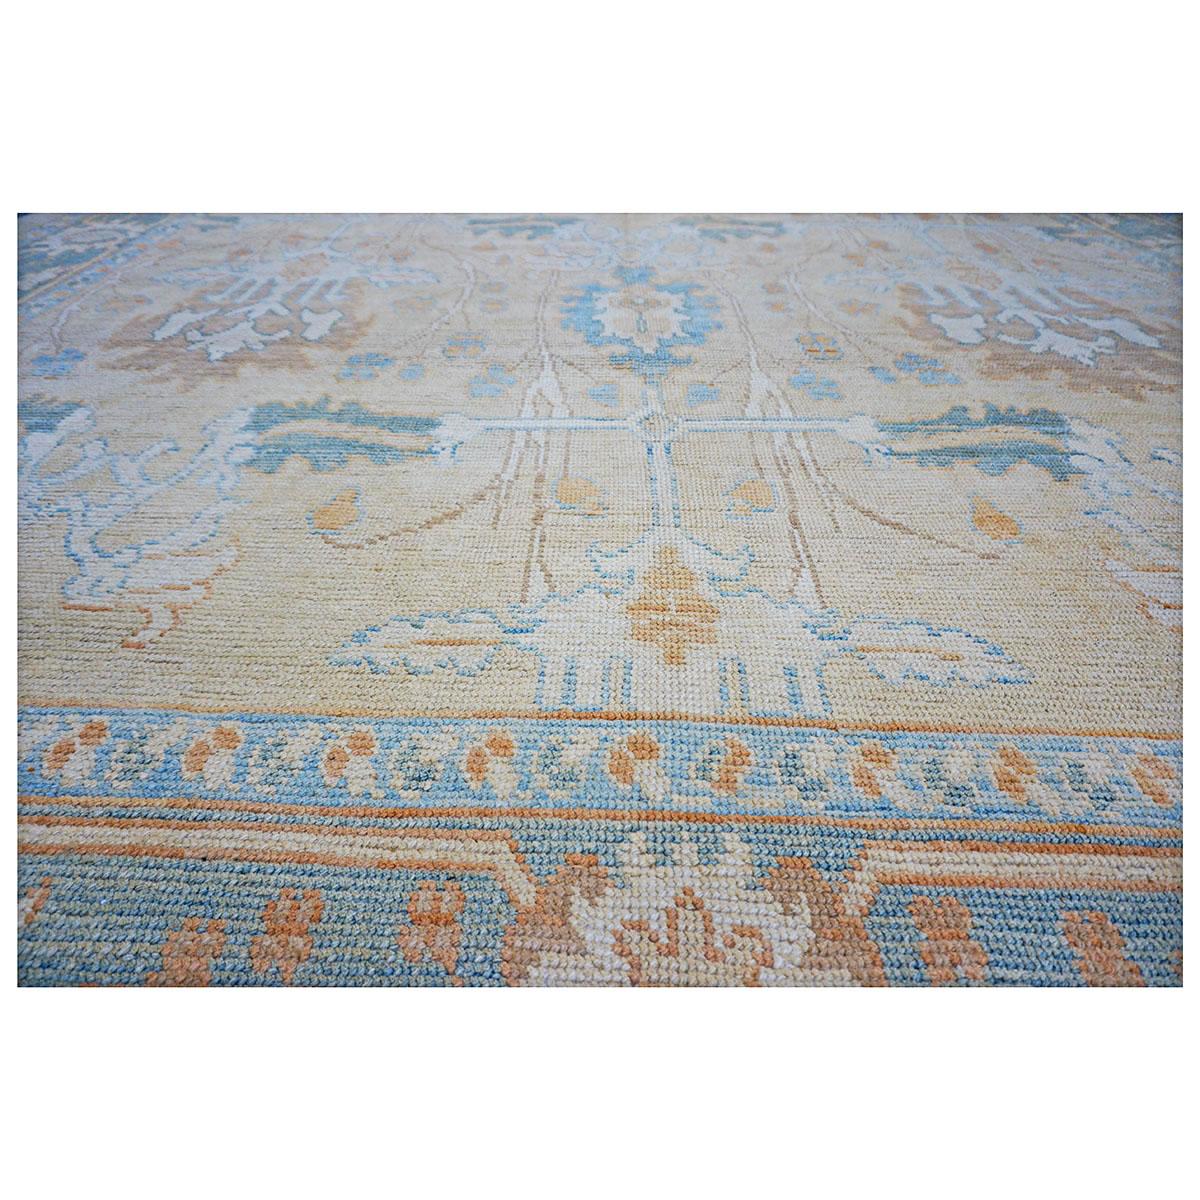 21st Century William Morris Donegal Carpet 11x15 Tan, Light Blue and Orange Rug In Good Condition For Sale In Houston, TX